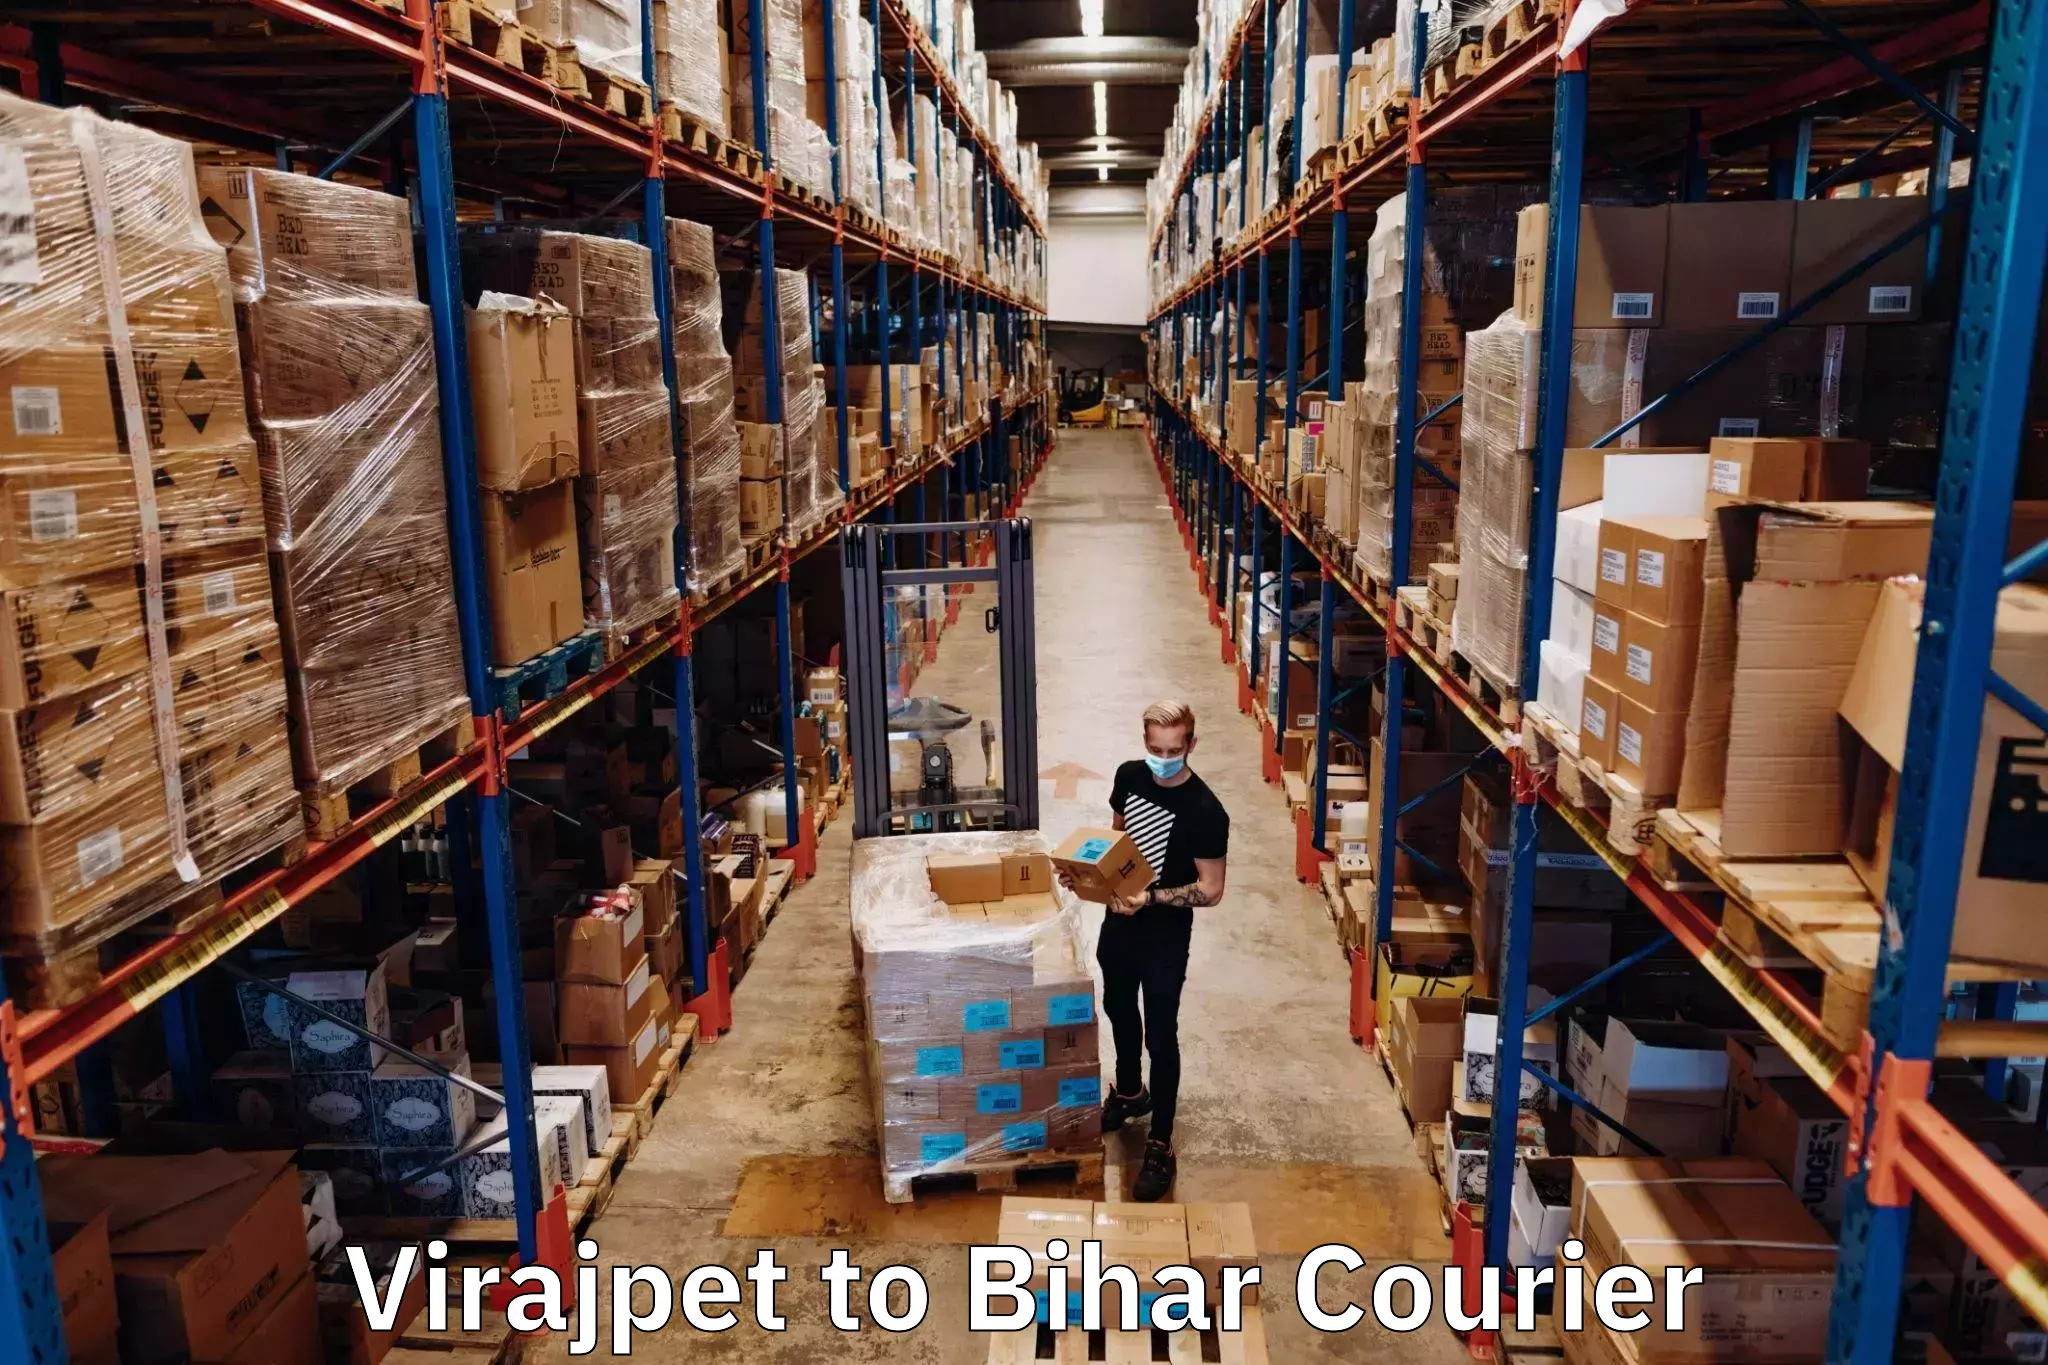 Subscription-based courier Virajpet to Brahmapur